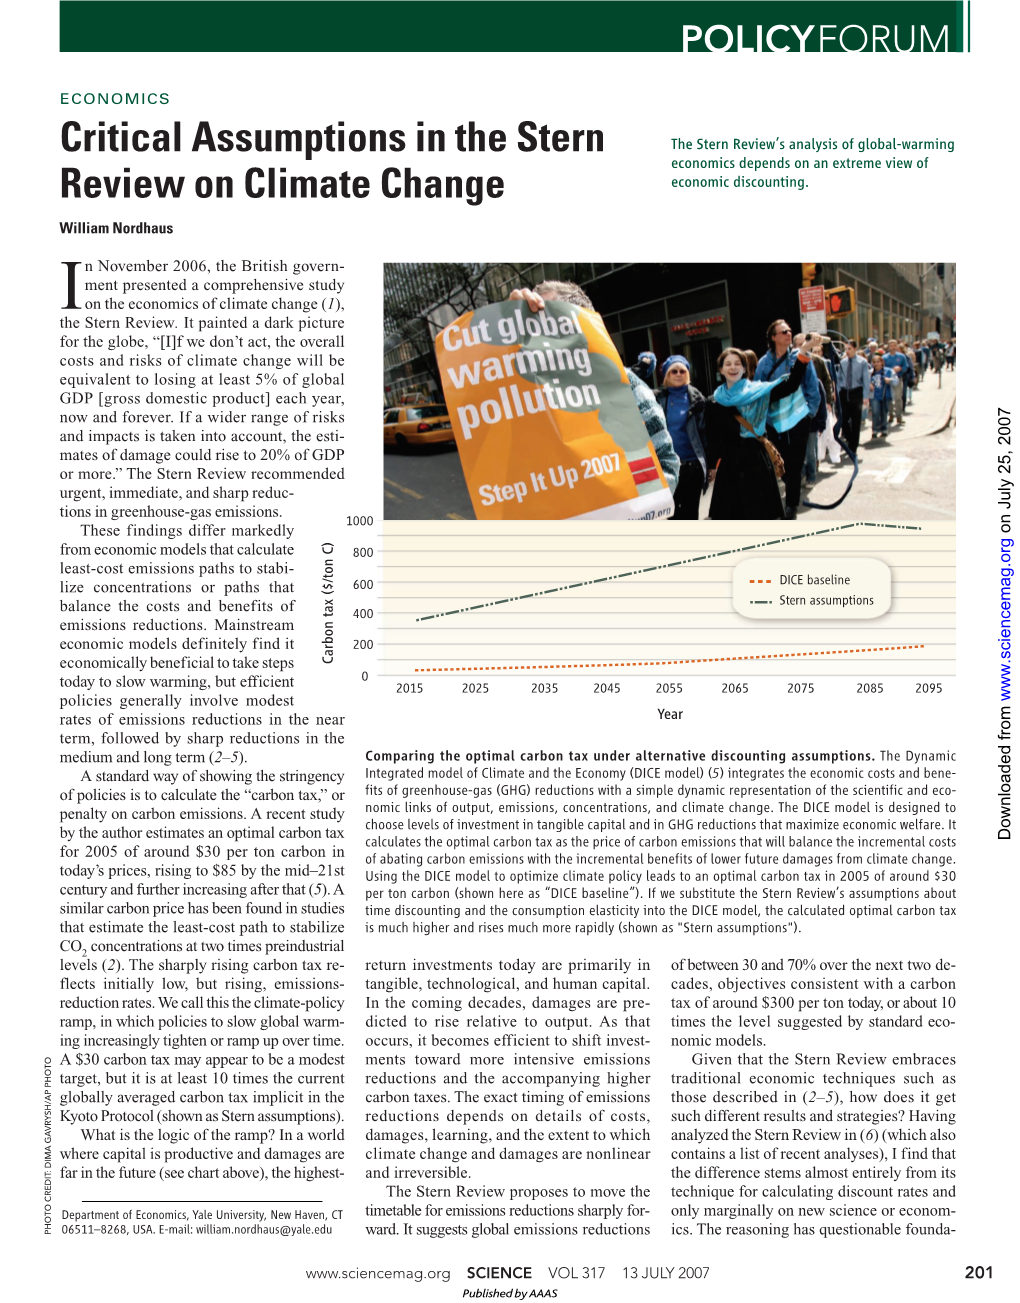 Critical Assumptions in the Stern Review on Climate Change